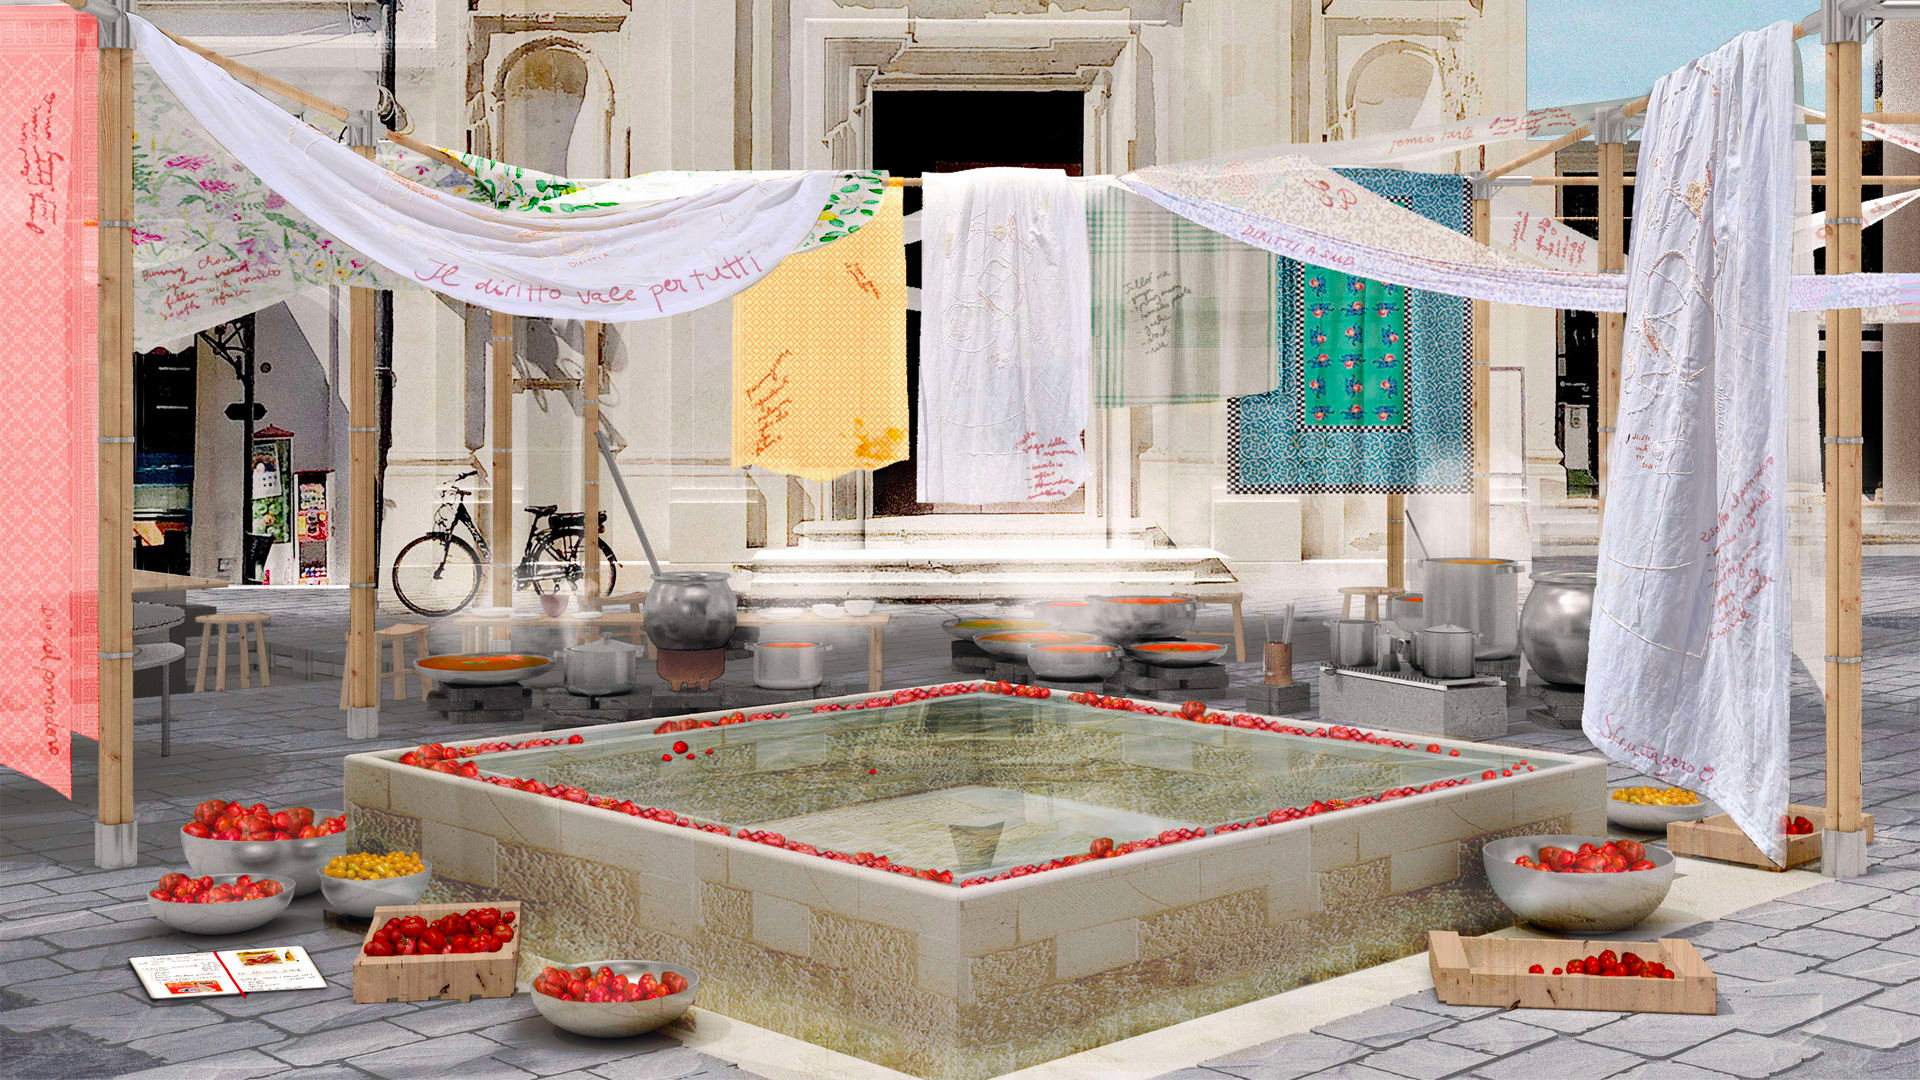 Image of a raised square shallow pool, corner on, its edges covered in tomatoes and fabric swathed on frames above, in what appears to be an open-air cooking area in a town.